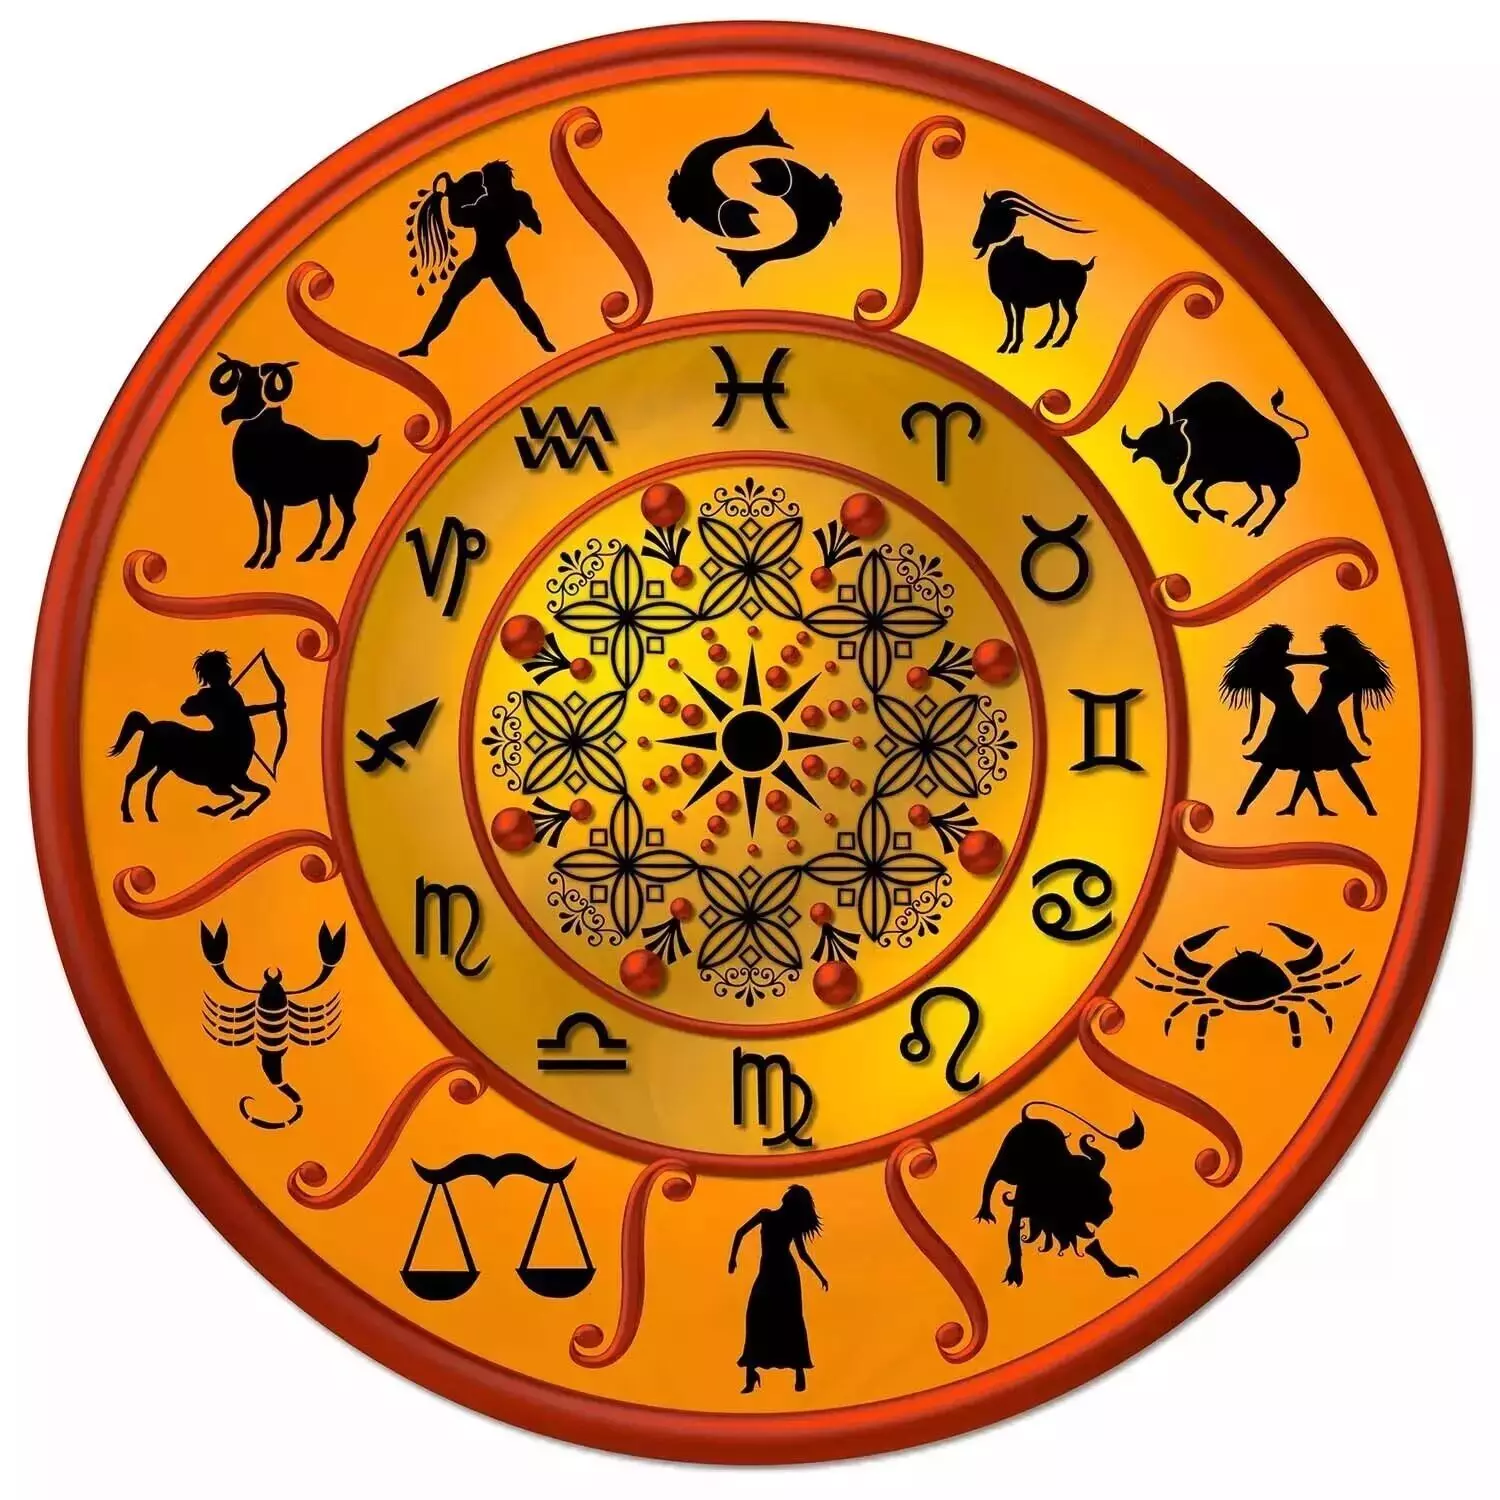 26 July  – Know your todays horoscope